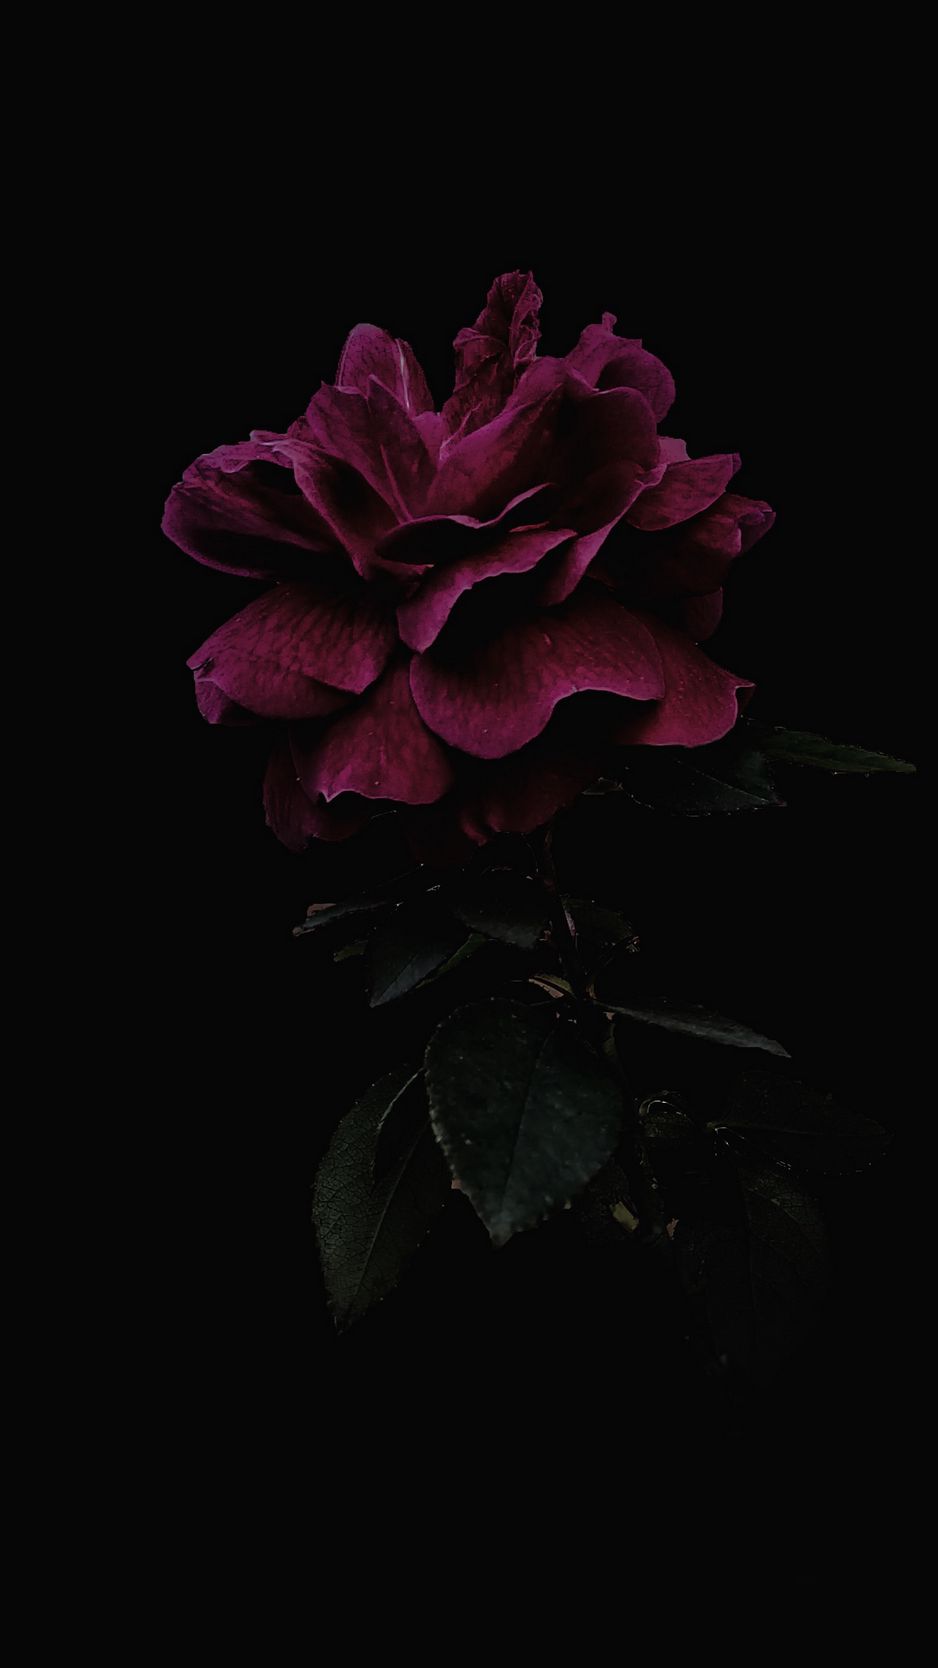 1920x1080 / 1920x1080 dark background, rose, pink, single, flower -  Coolwallpapers.me!